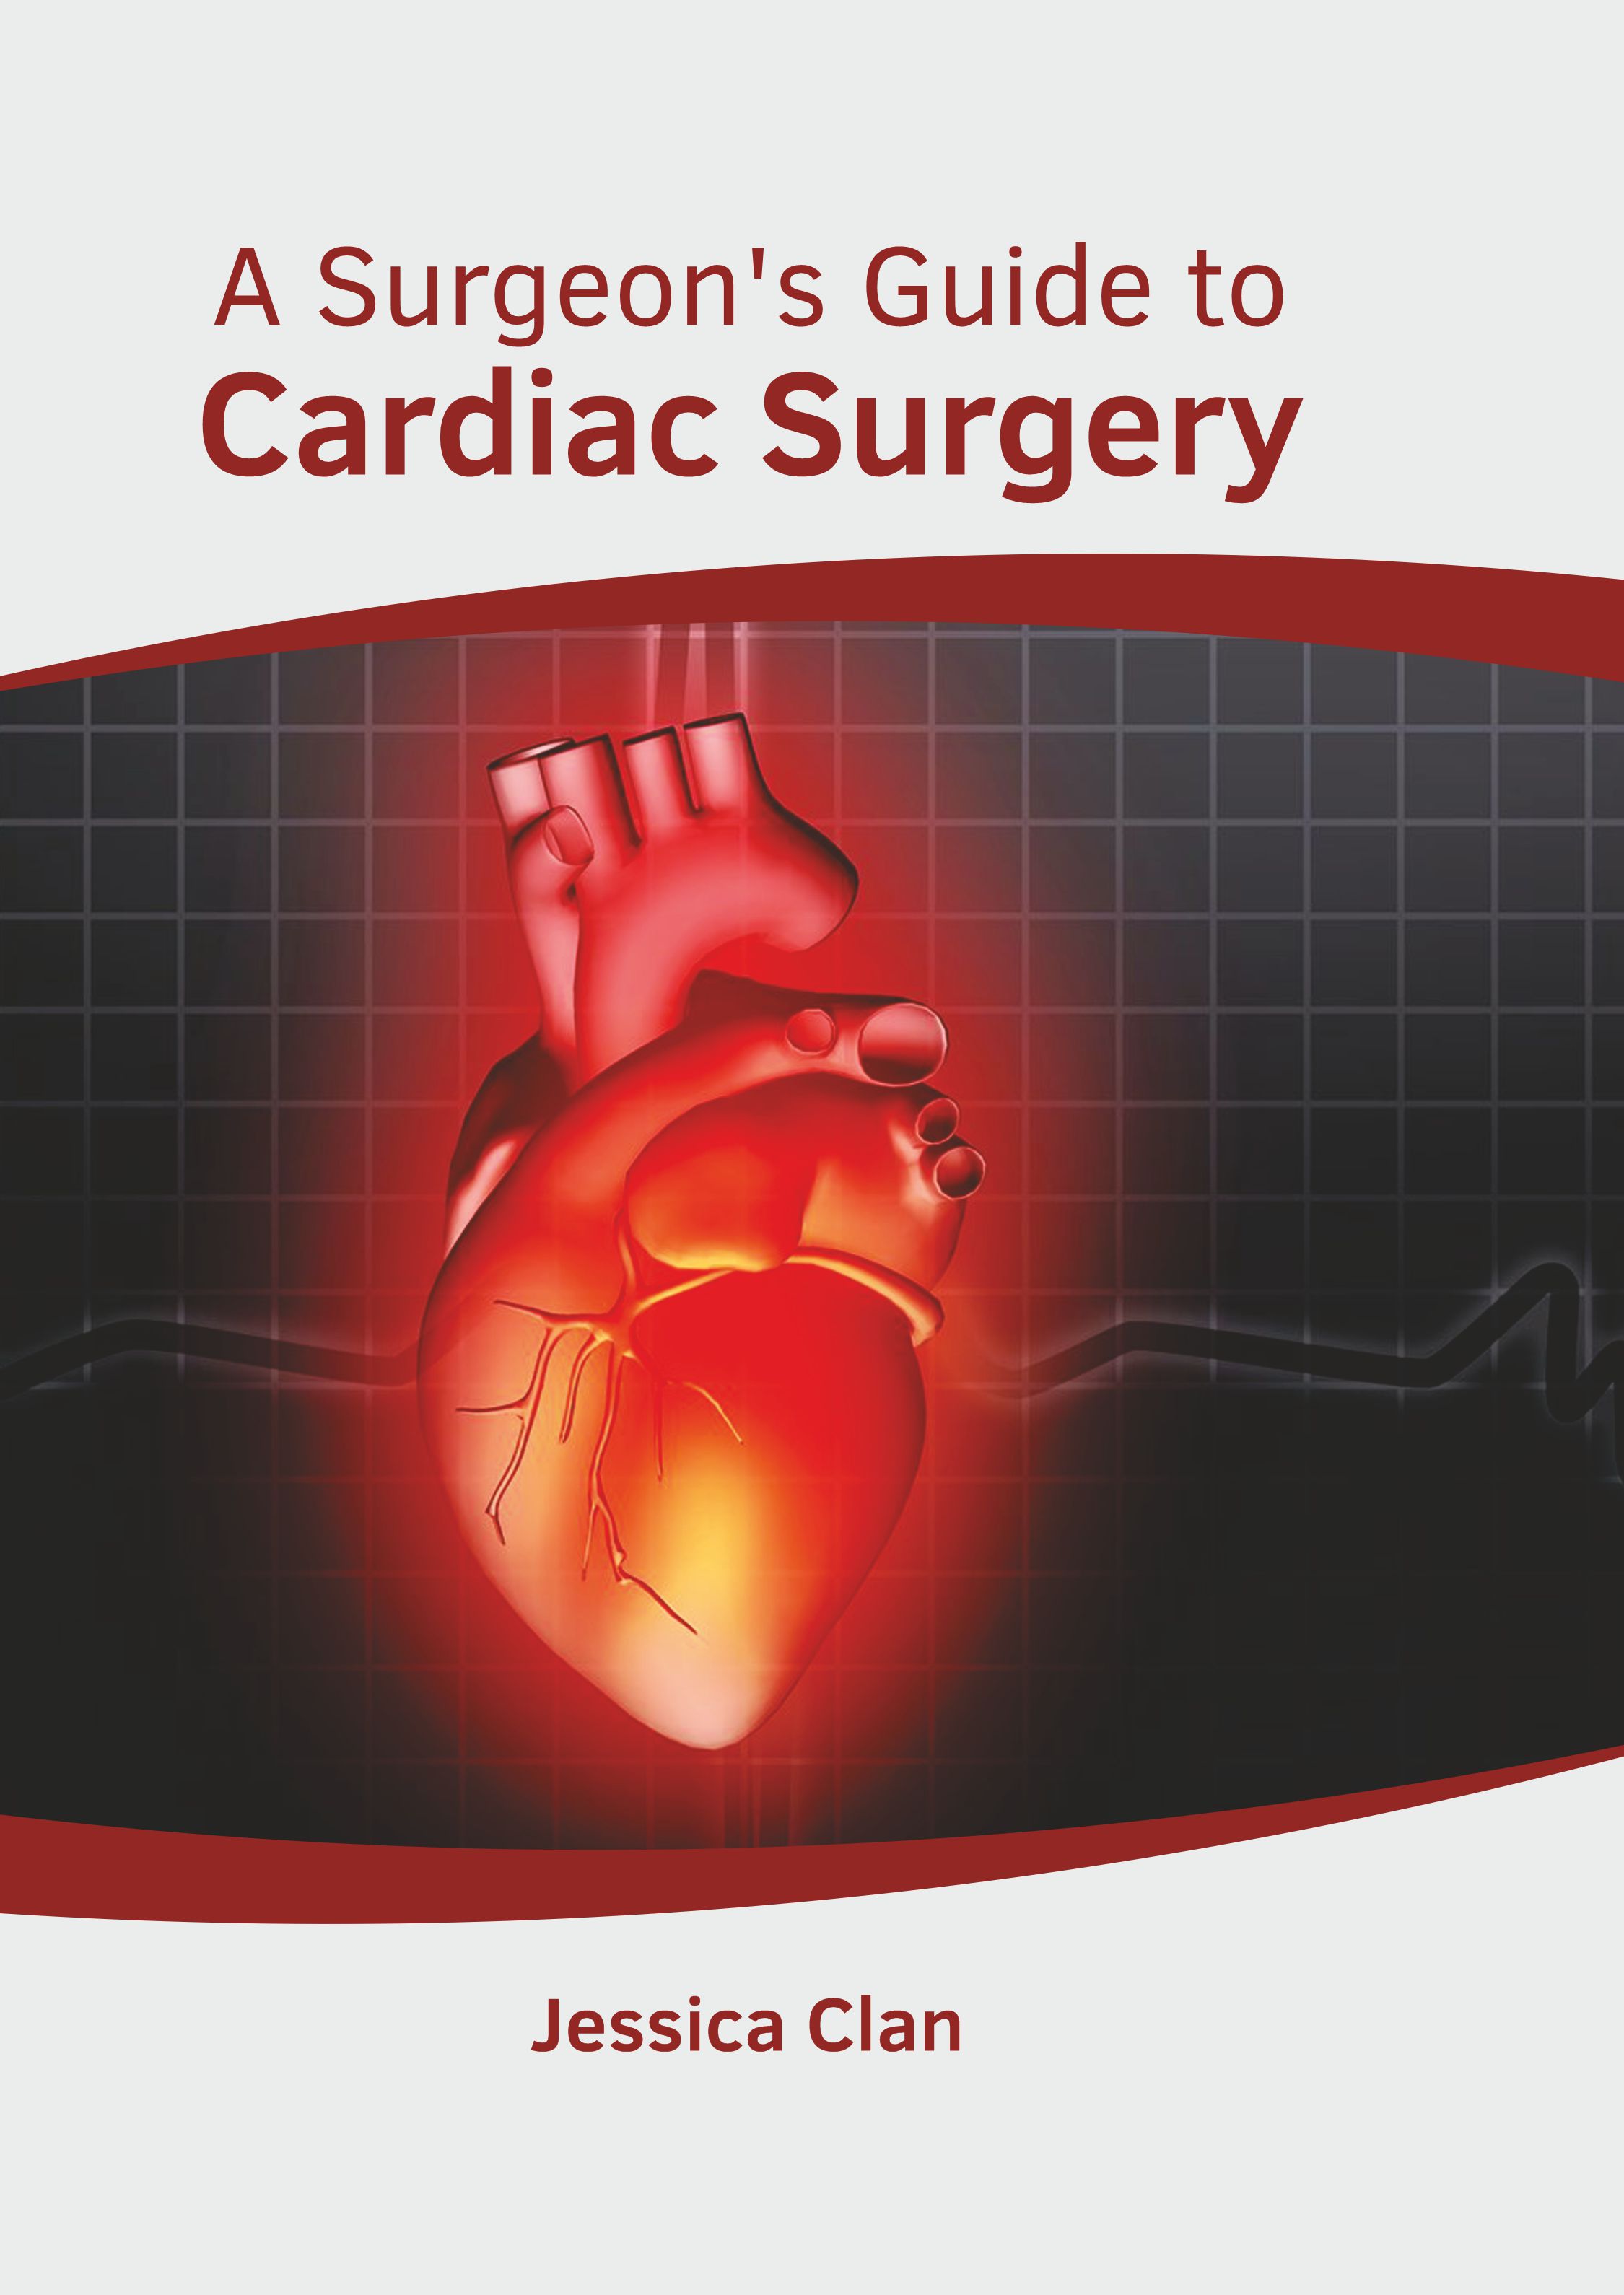 

exclusive-publishers/american-medical-publishers/a-surgeon-s-guide-to-cardiac-surgery-9781639274833